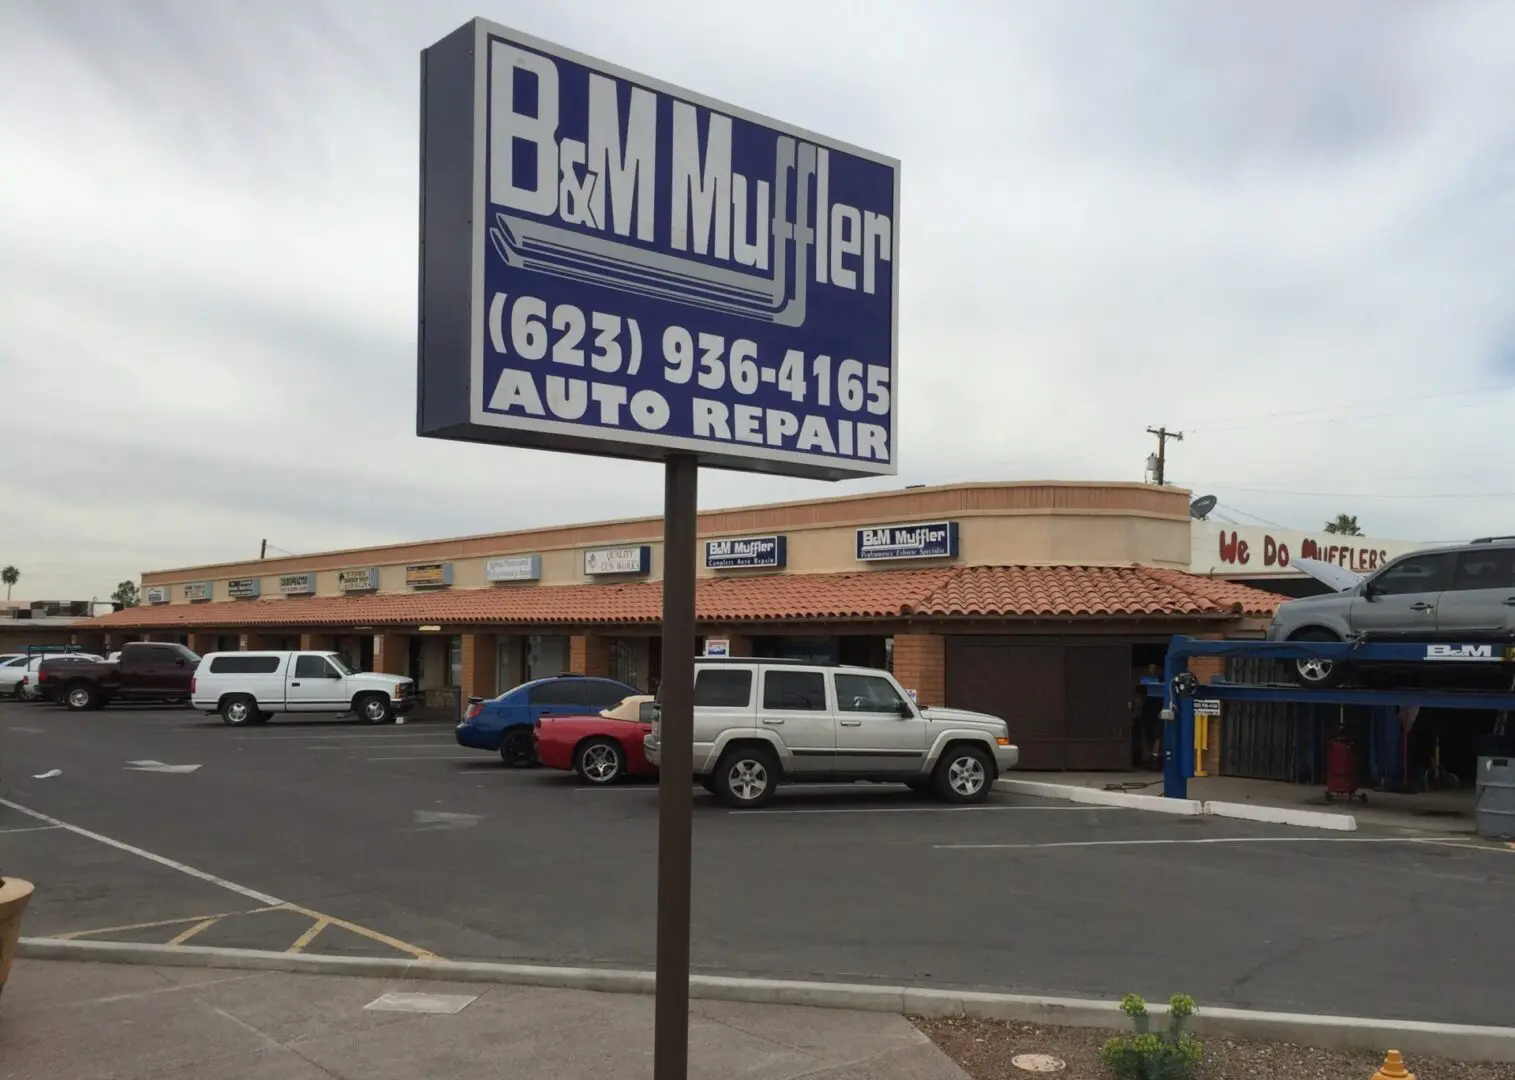 A sign for b & m muffler in front of an auto repair shop.